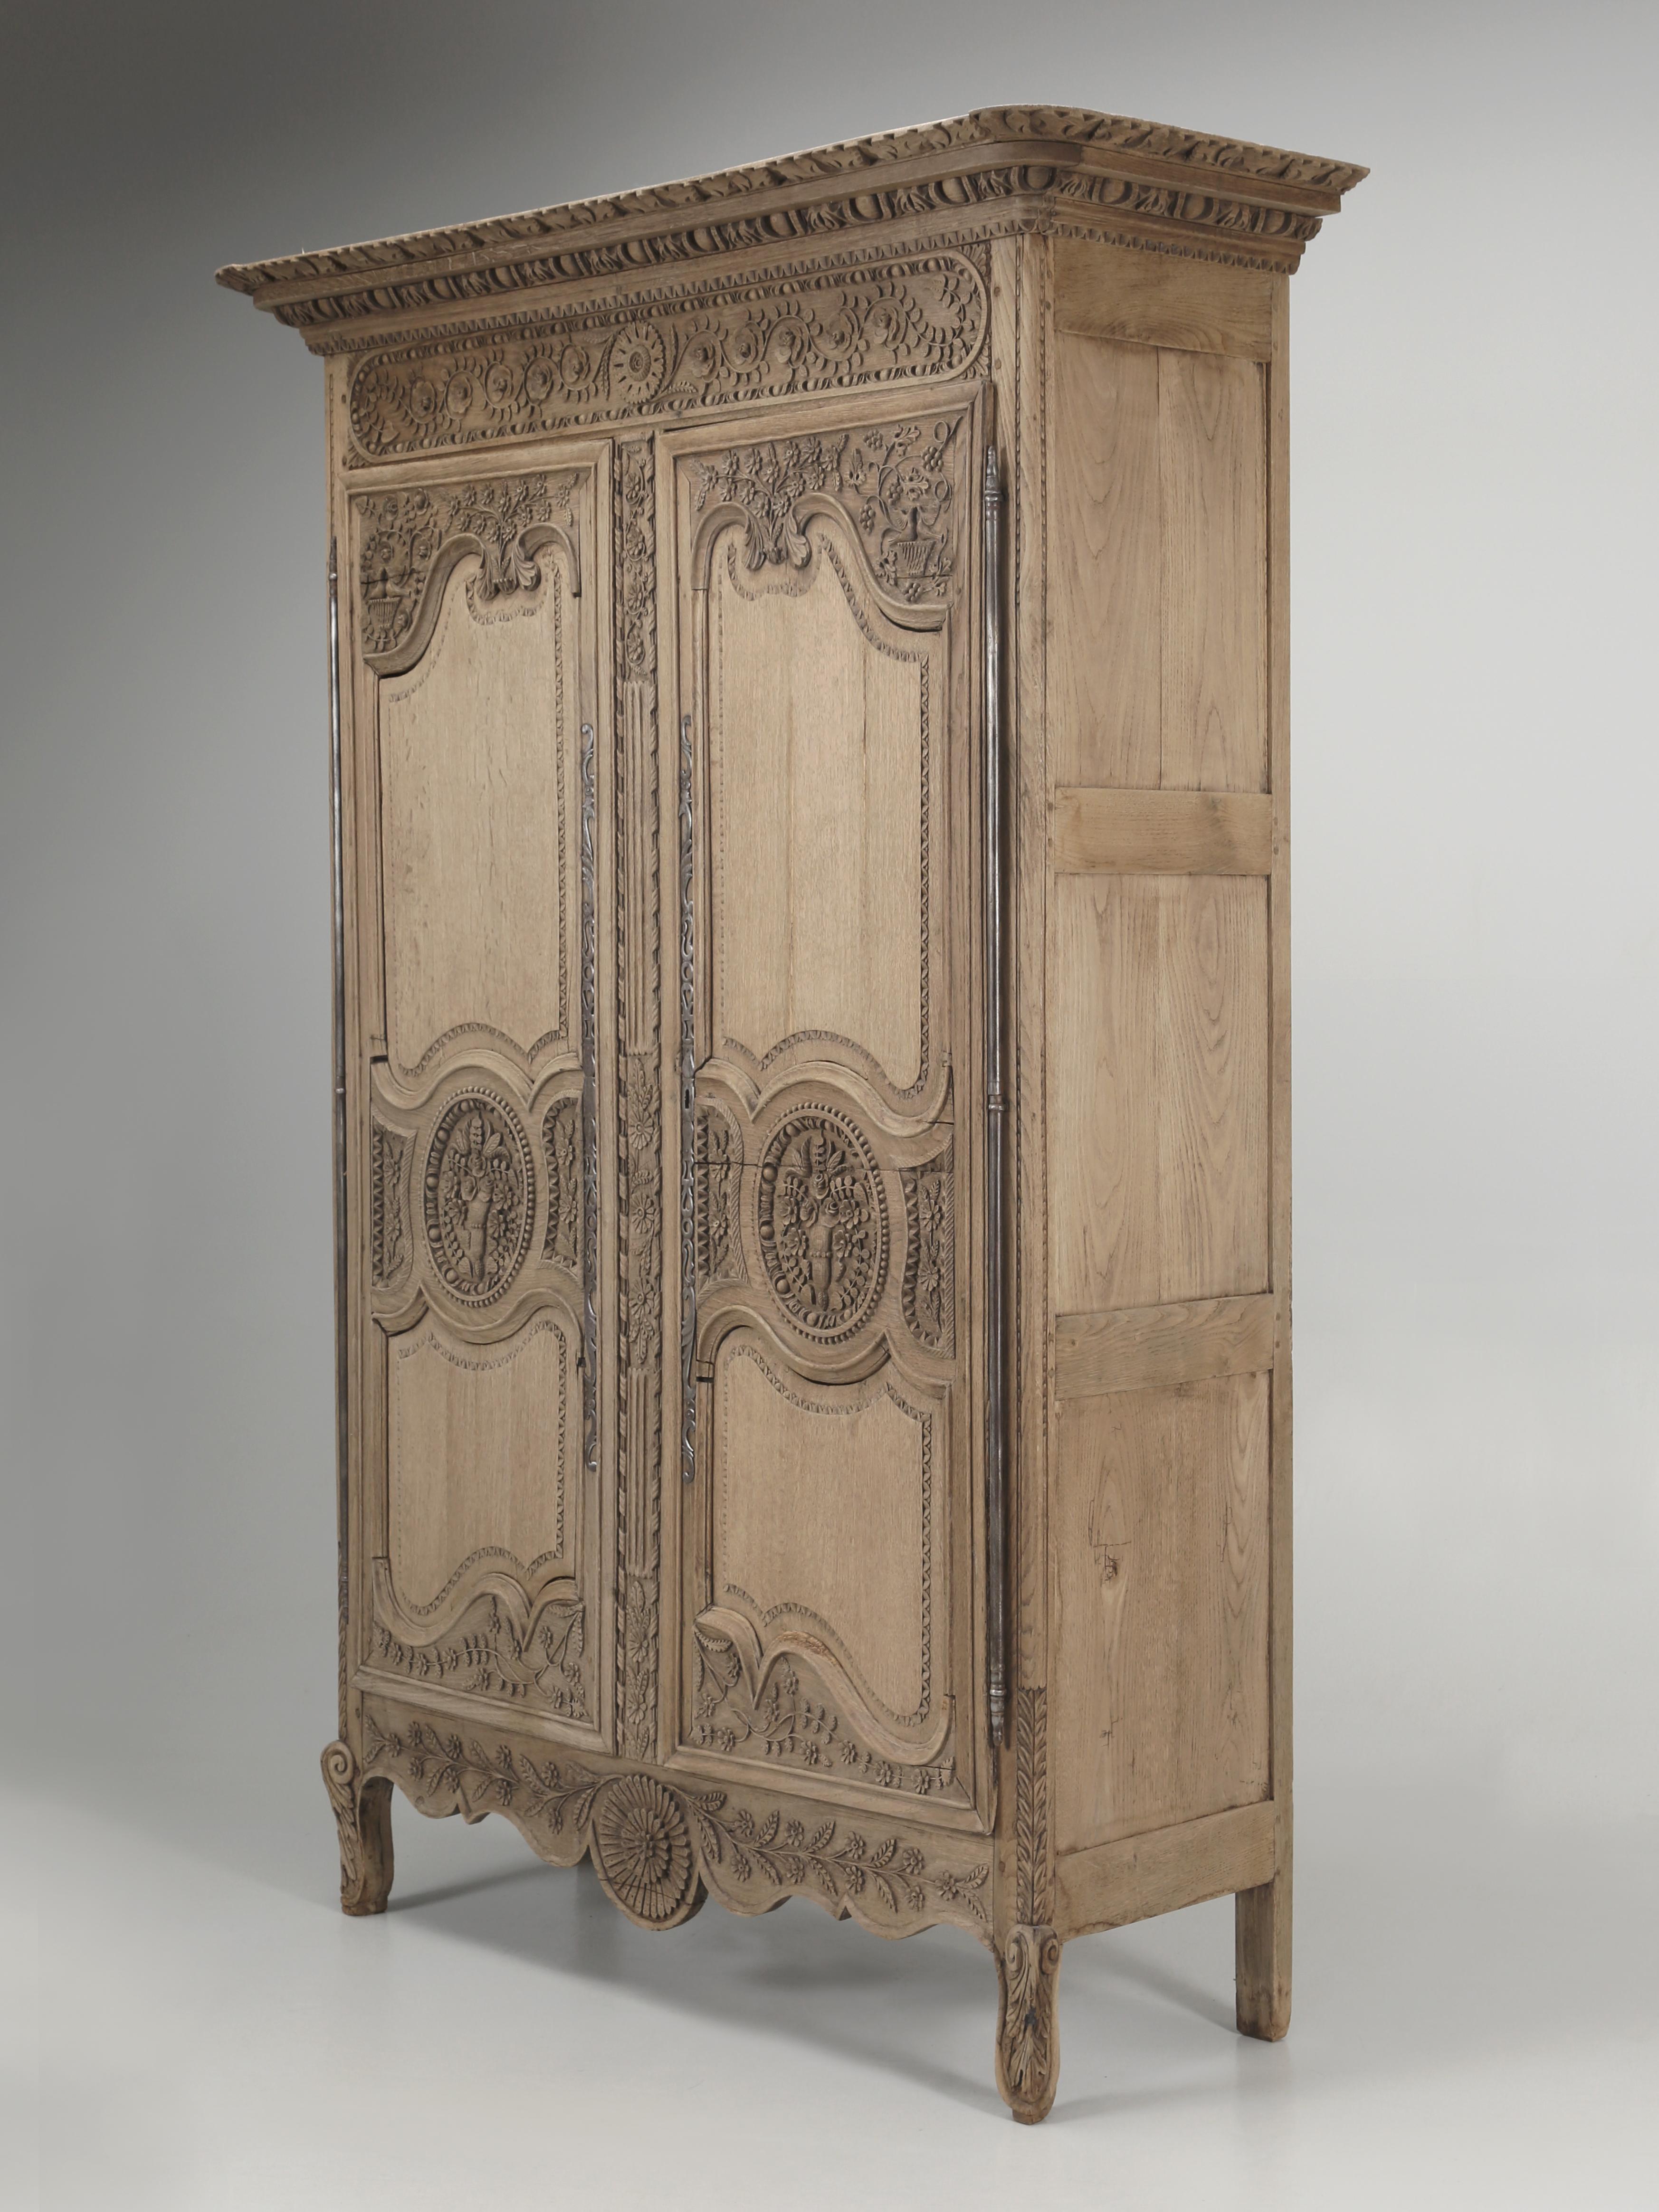 Antique French Oak Armoire from the Normandy region of France which were commonly referred to as Wedding Armoires. In France, this was the traditional French custom for a father to gift his newborn daughter, an Armoire carved with symbols and in